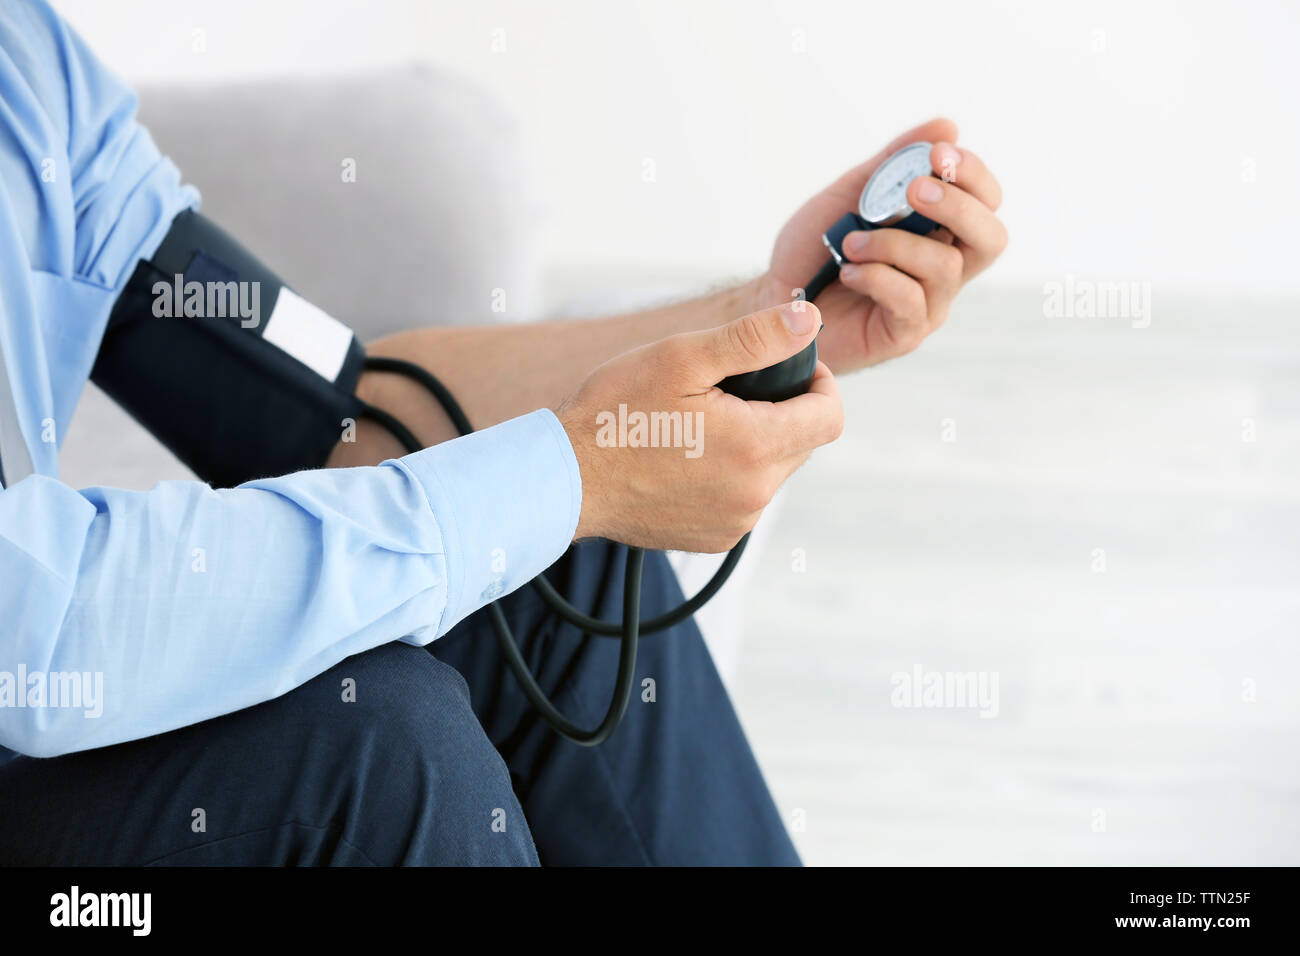 PARIS, FRANCE - OCT 30, 2018: Man holding new Omron Evolv Bluetooth  Wireless Upper Arm Blood Pressure Monitor against white background Stock  Photo - Alamy